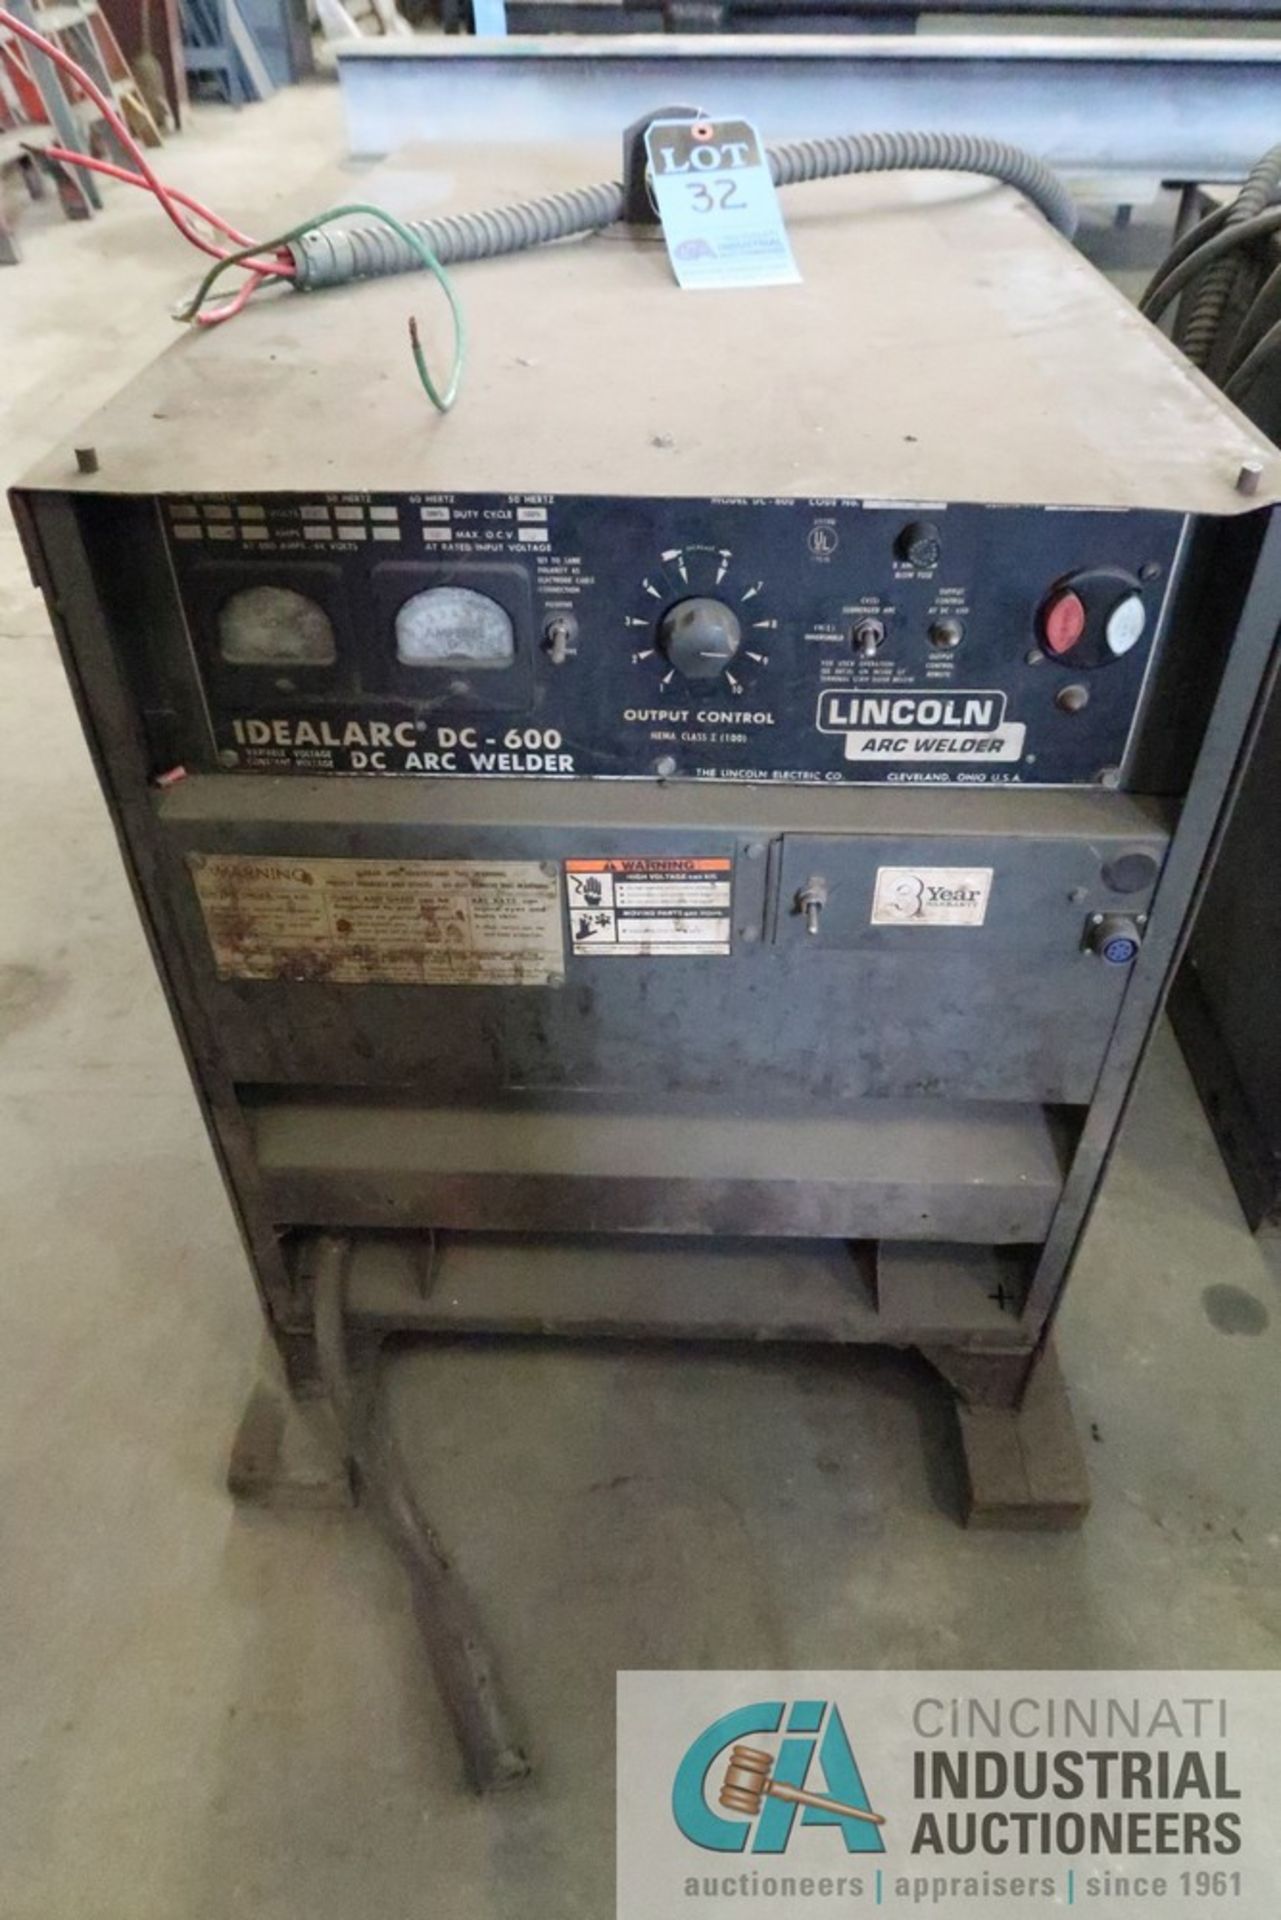 600 AMP LINCOLN ELECTRIC MODEL DC-600 ARC WELDING POWER SOURCE - Image 3 of 7